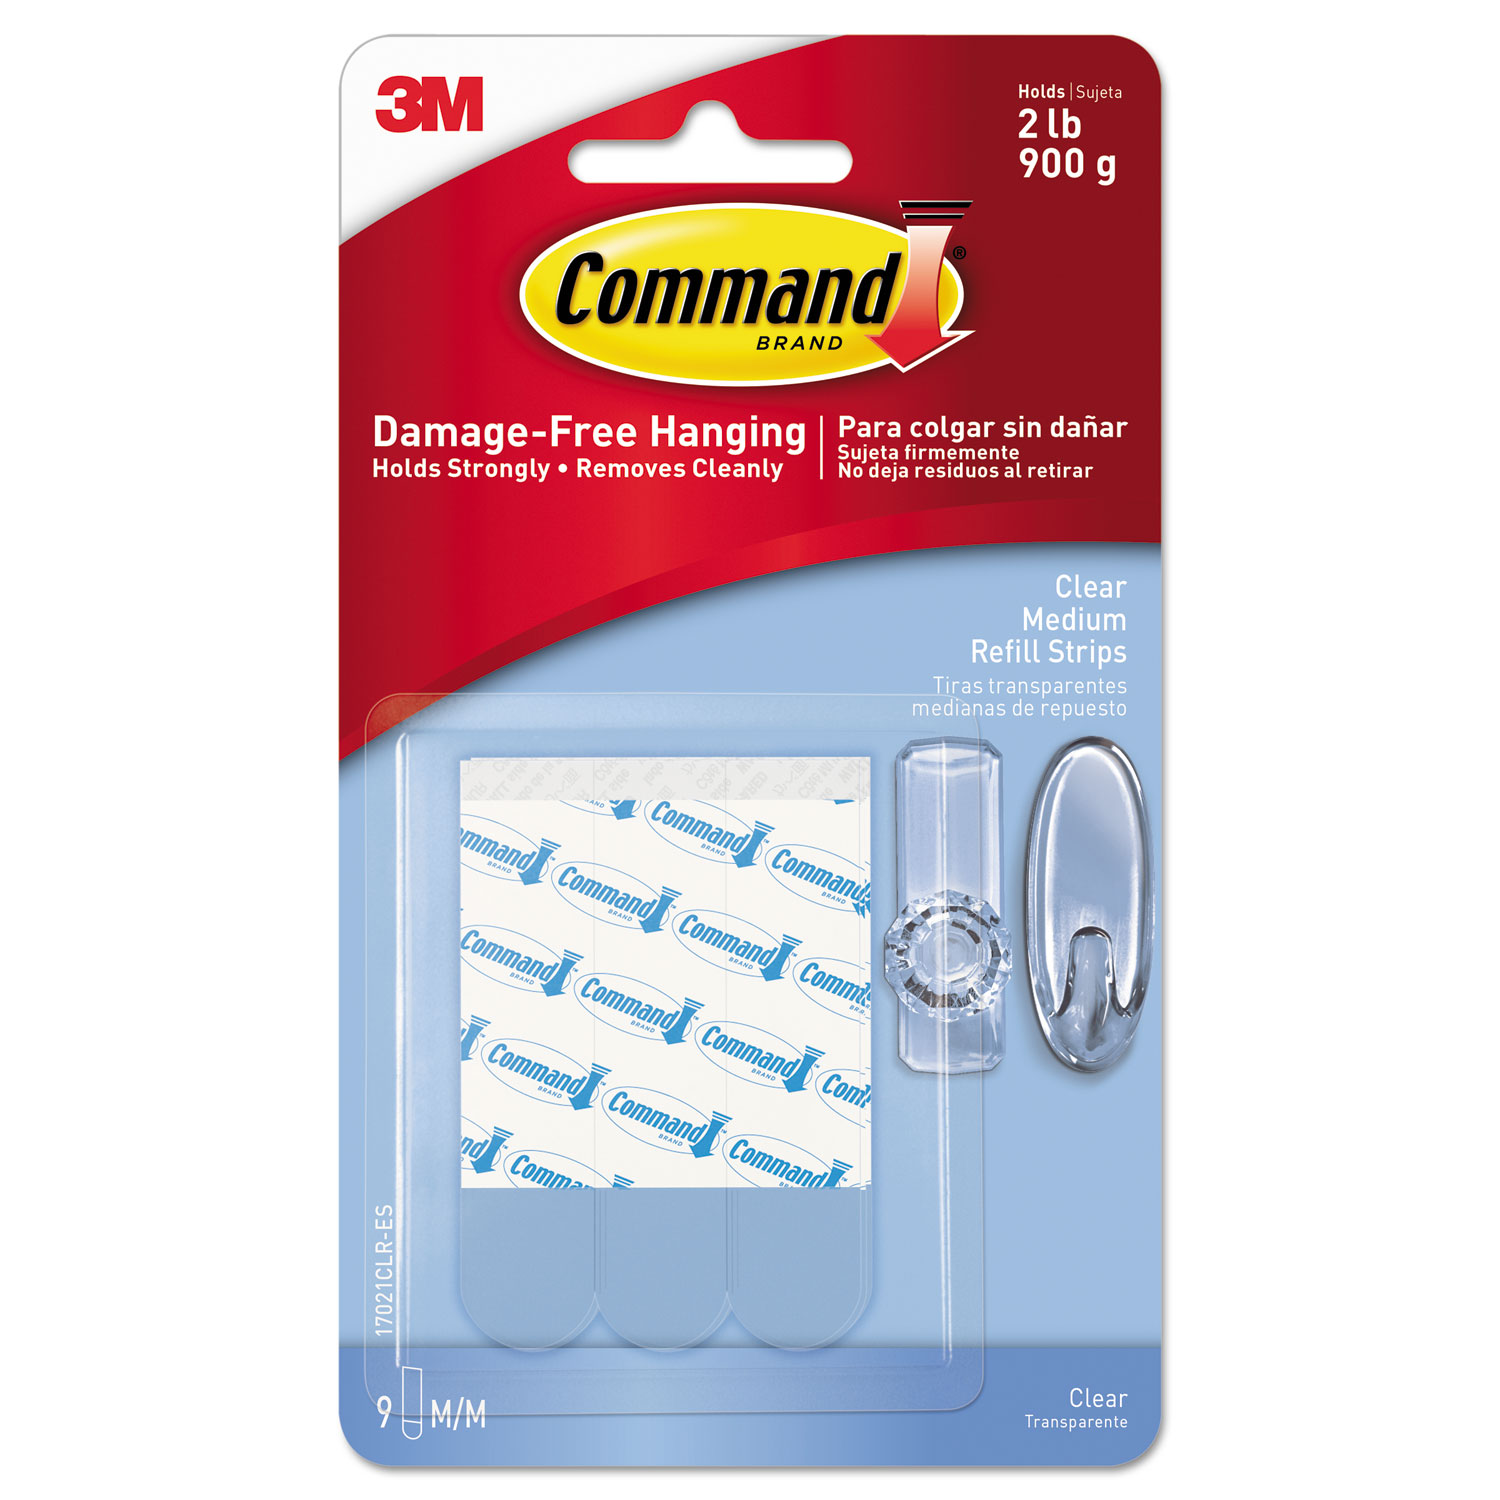  Command 17021CLR-ES Clear Refill Strips, 5/8 x 1 3/4, 9/Pack (MMM17021CLRES) 